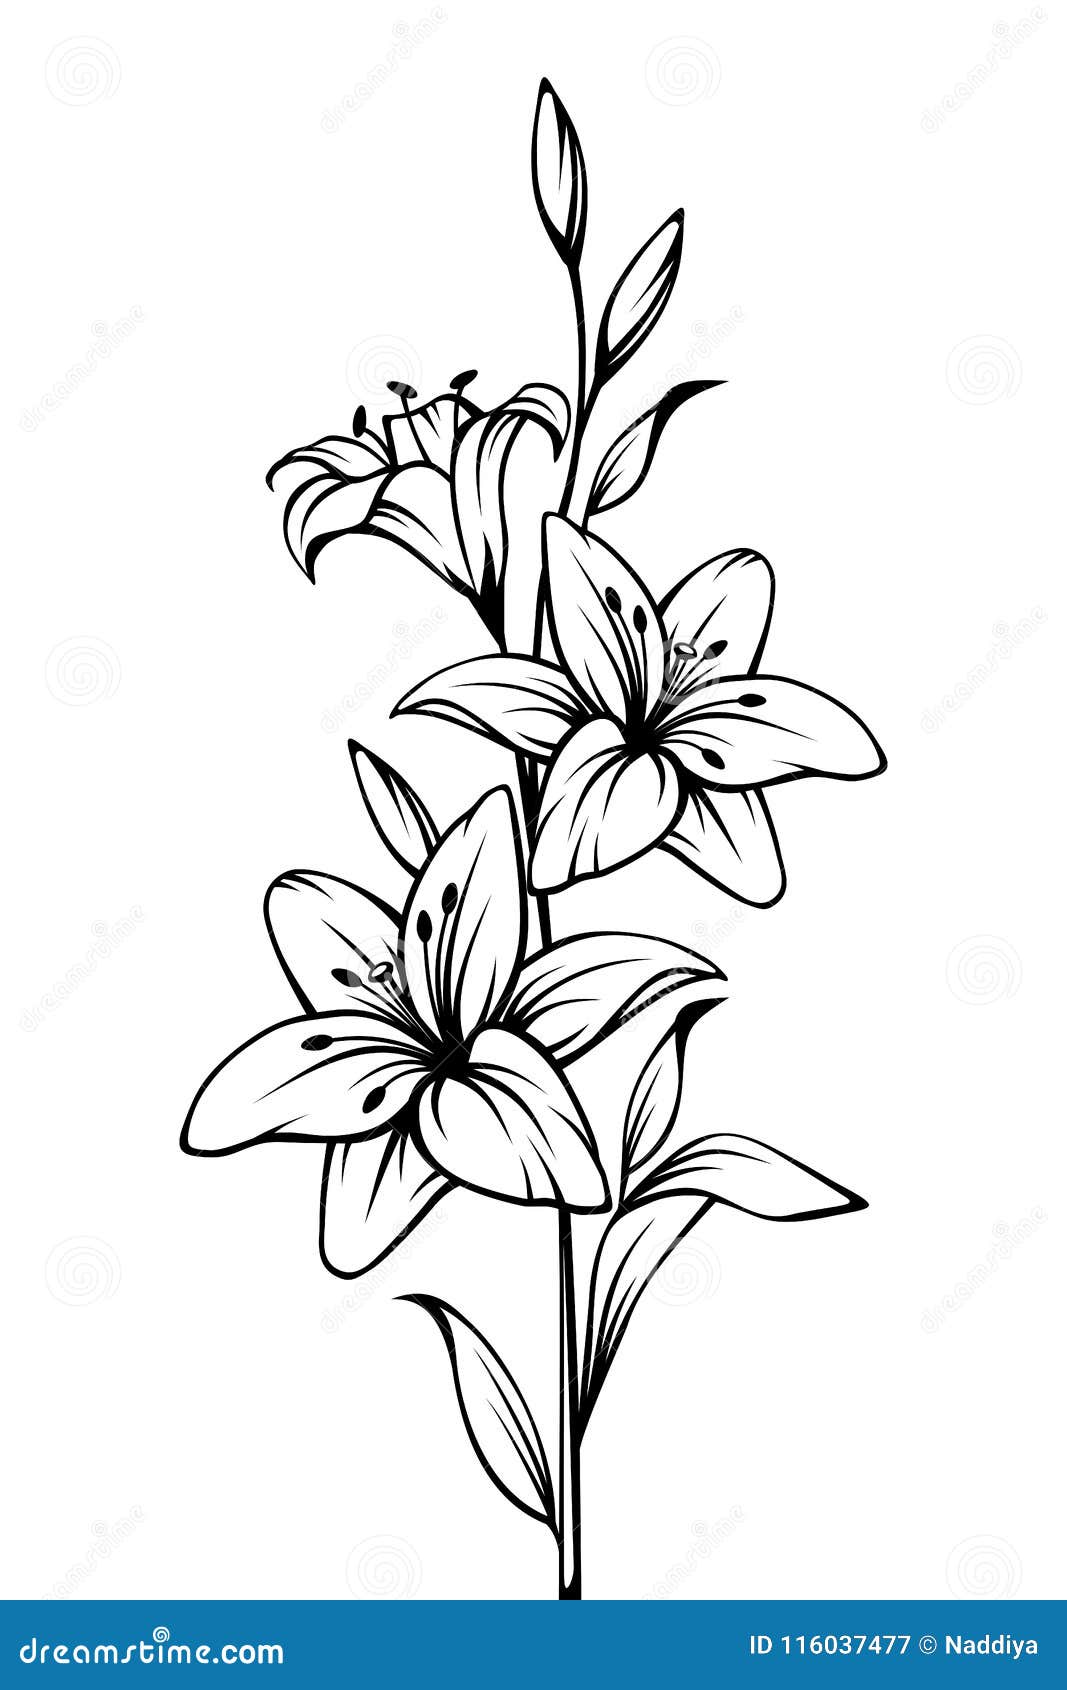 lily flowers.  black and white contour drawing.